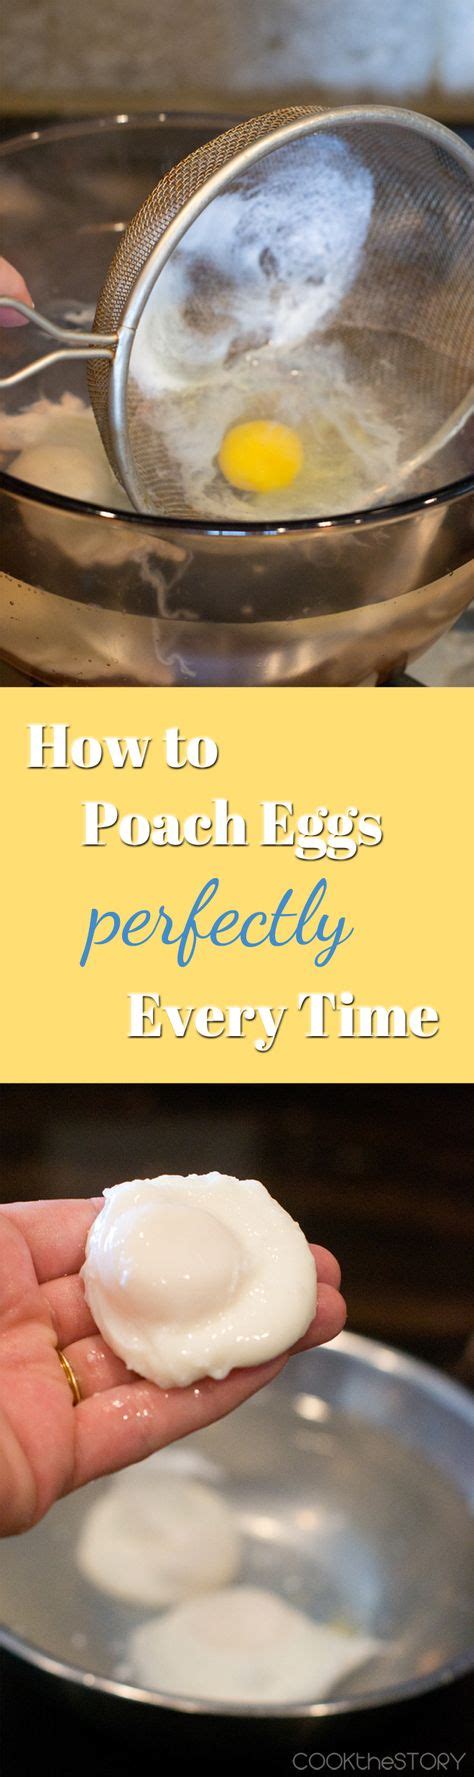 How To Poach An Egg Perfectly Every Time Еда